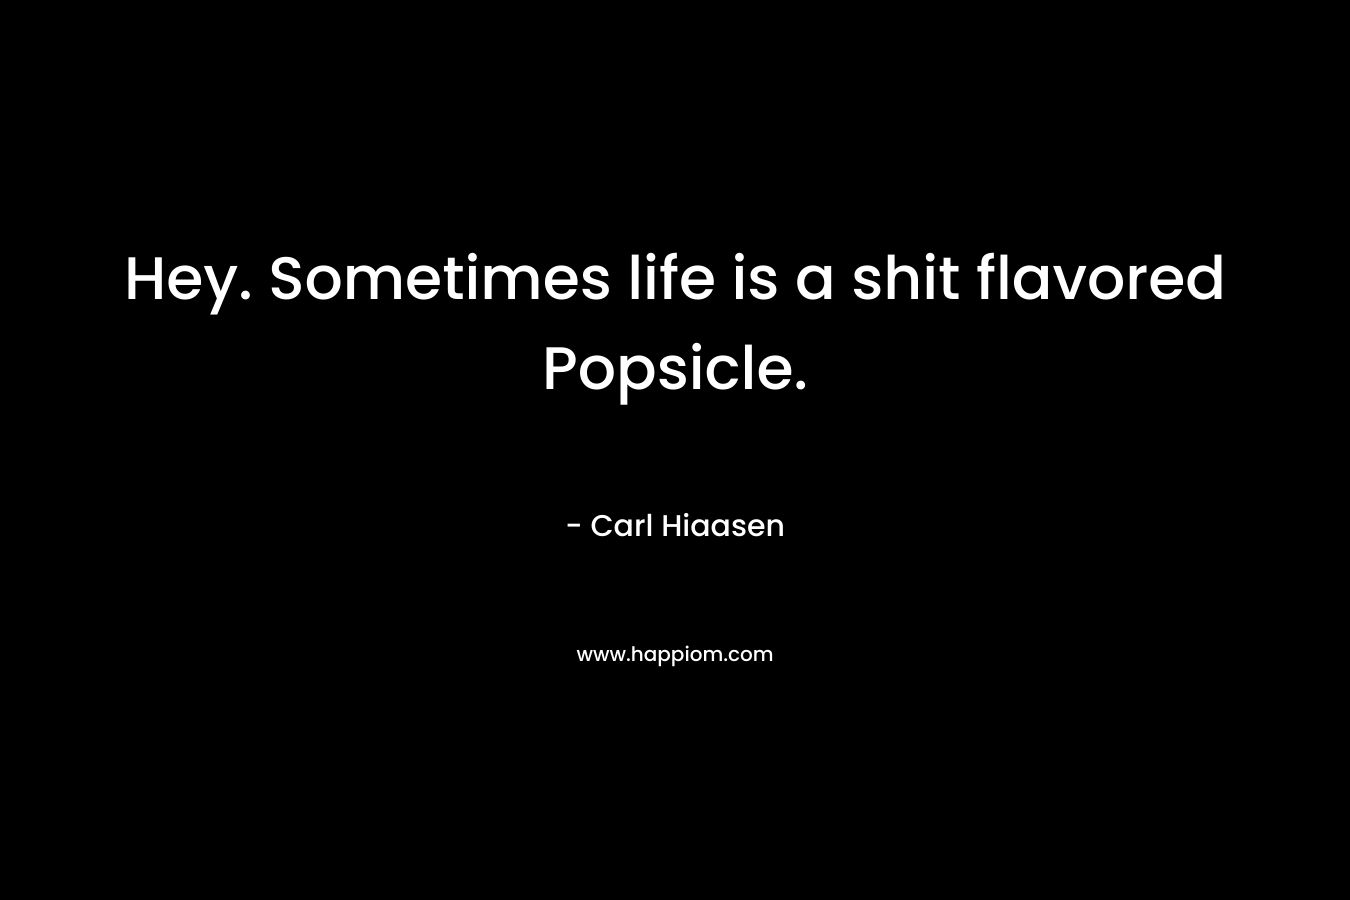 Hey. Sometimes life is a shit flavored Popsicle.